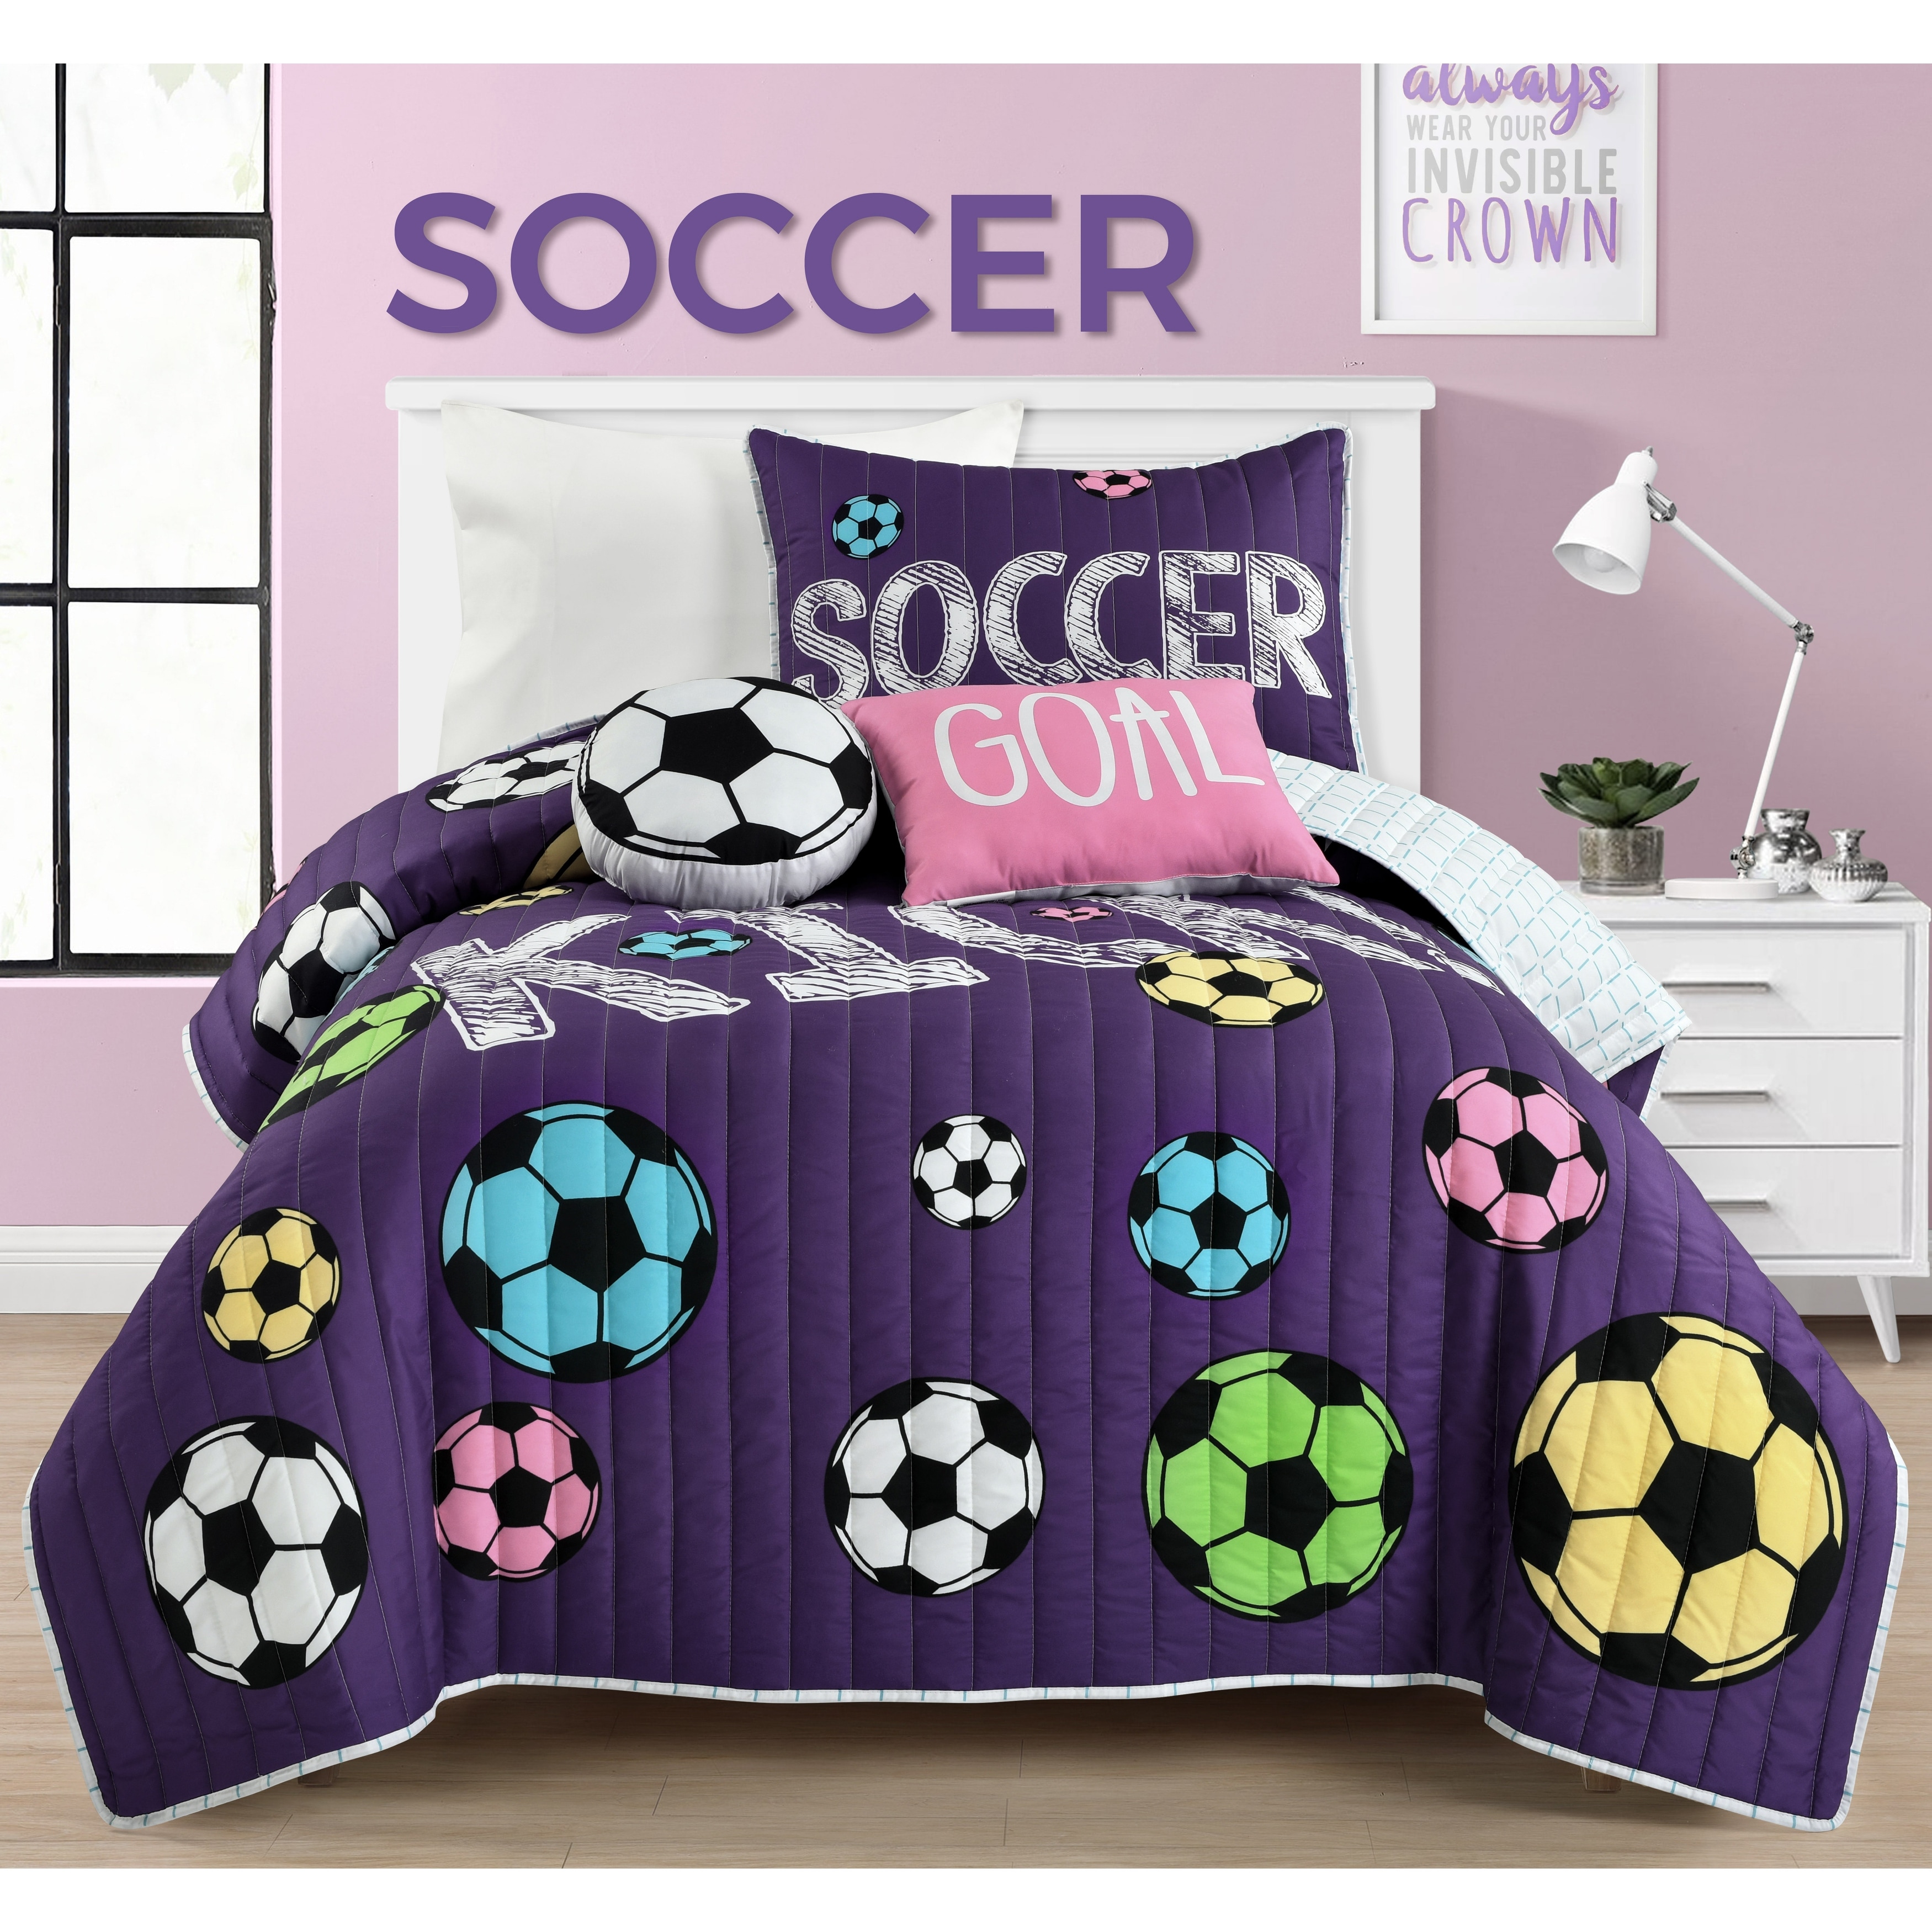 Soccer Geometric Microfiber Fitted Sheet East Urban Home Size: Full/Double